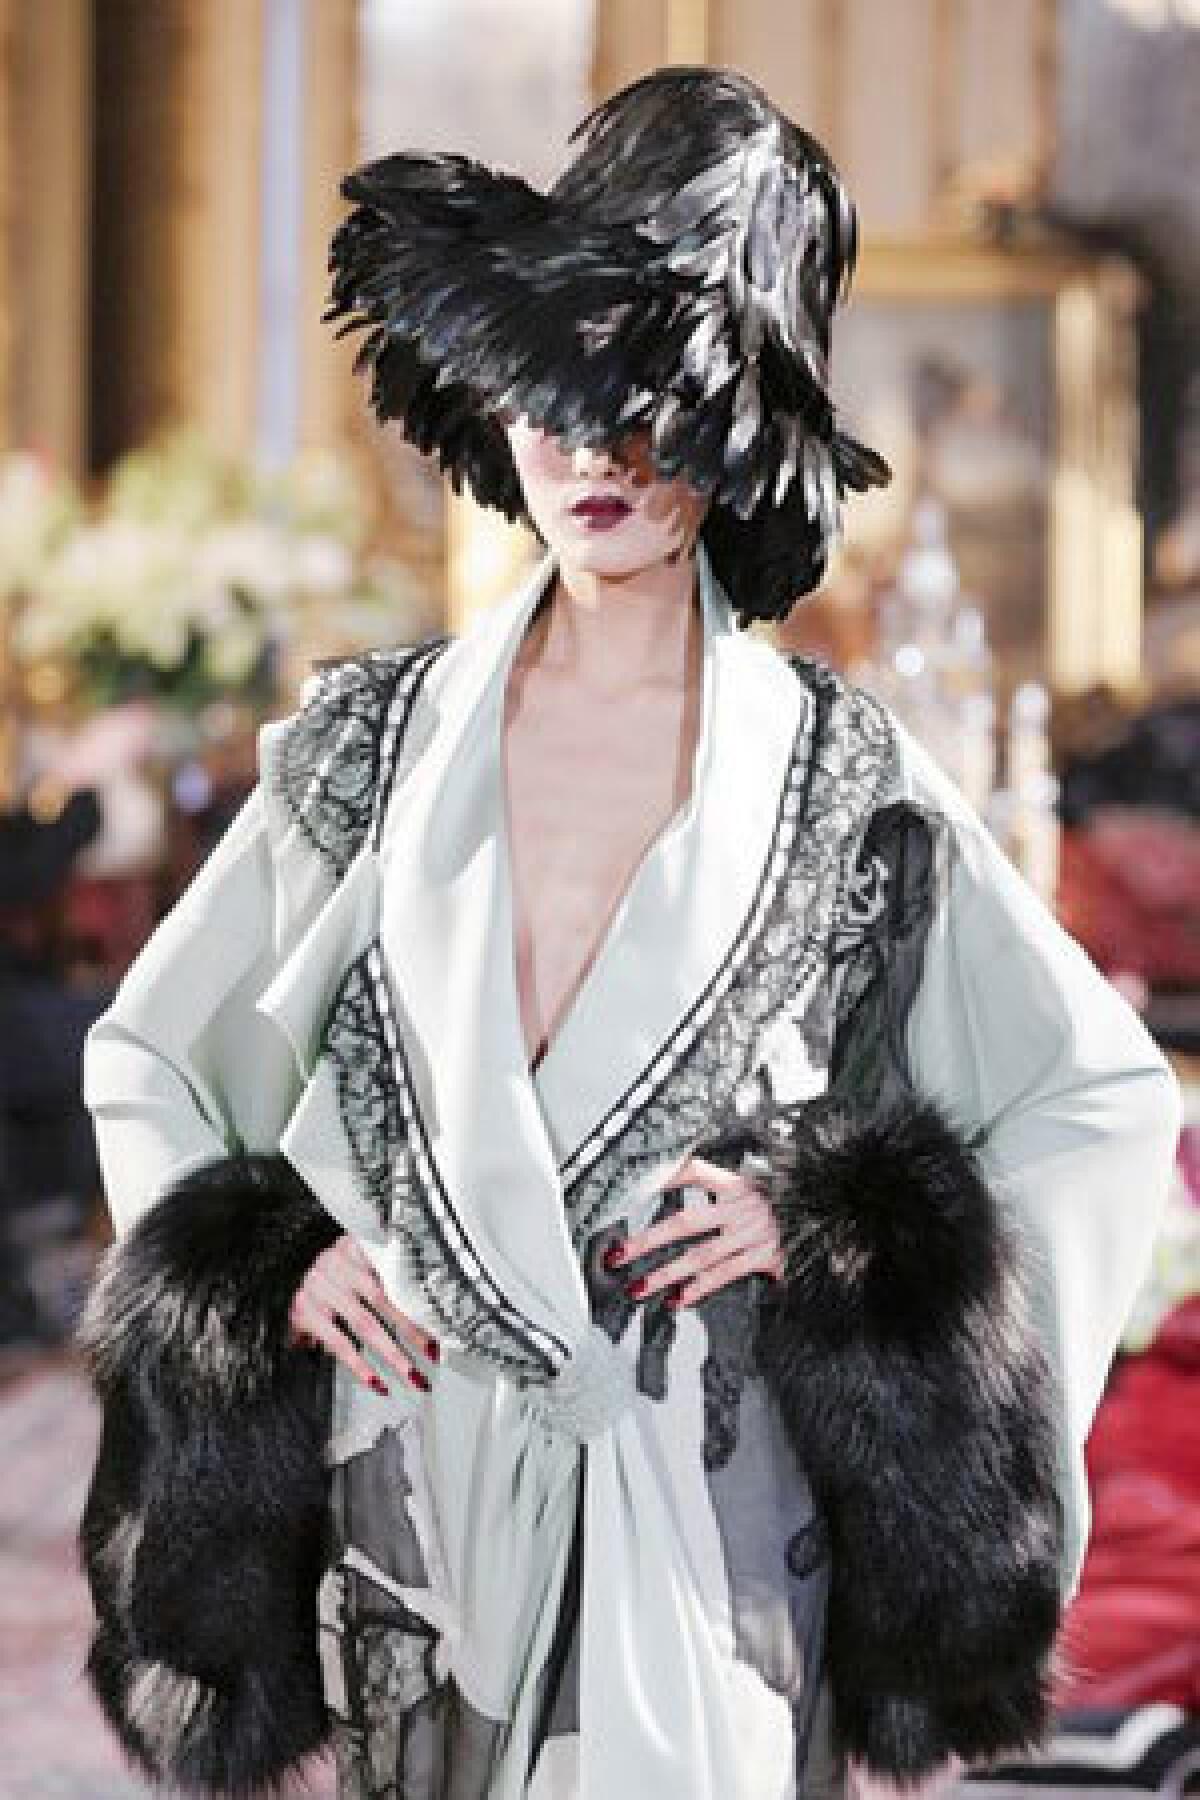 Galliano's collection included a lacy pale green kimono coat with fur trim.